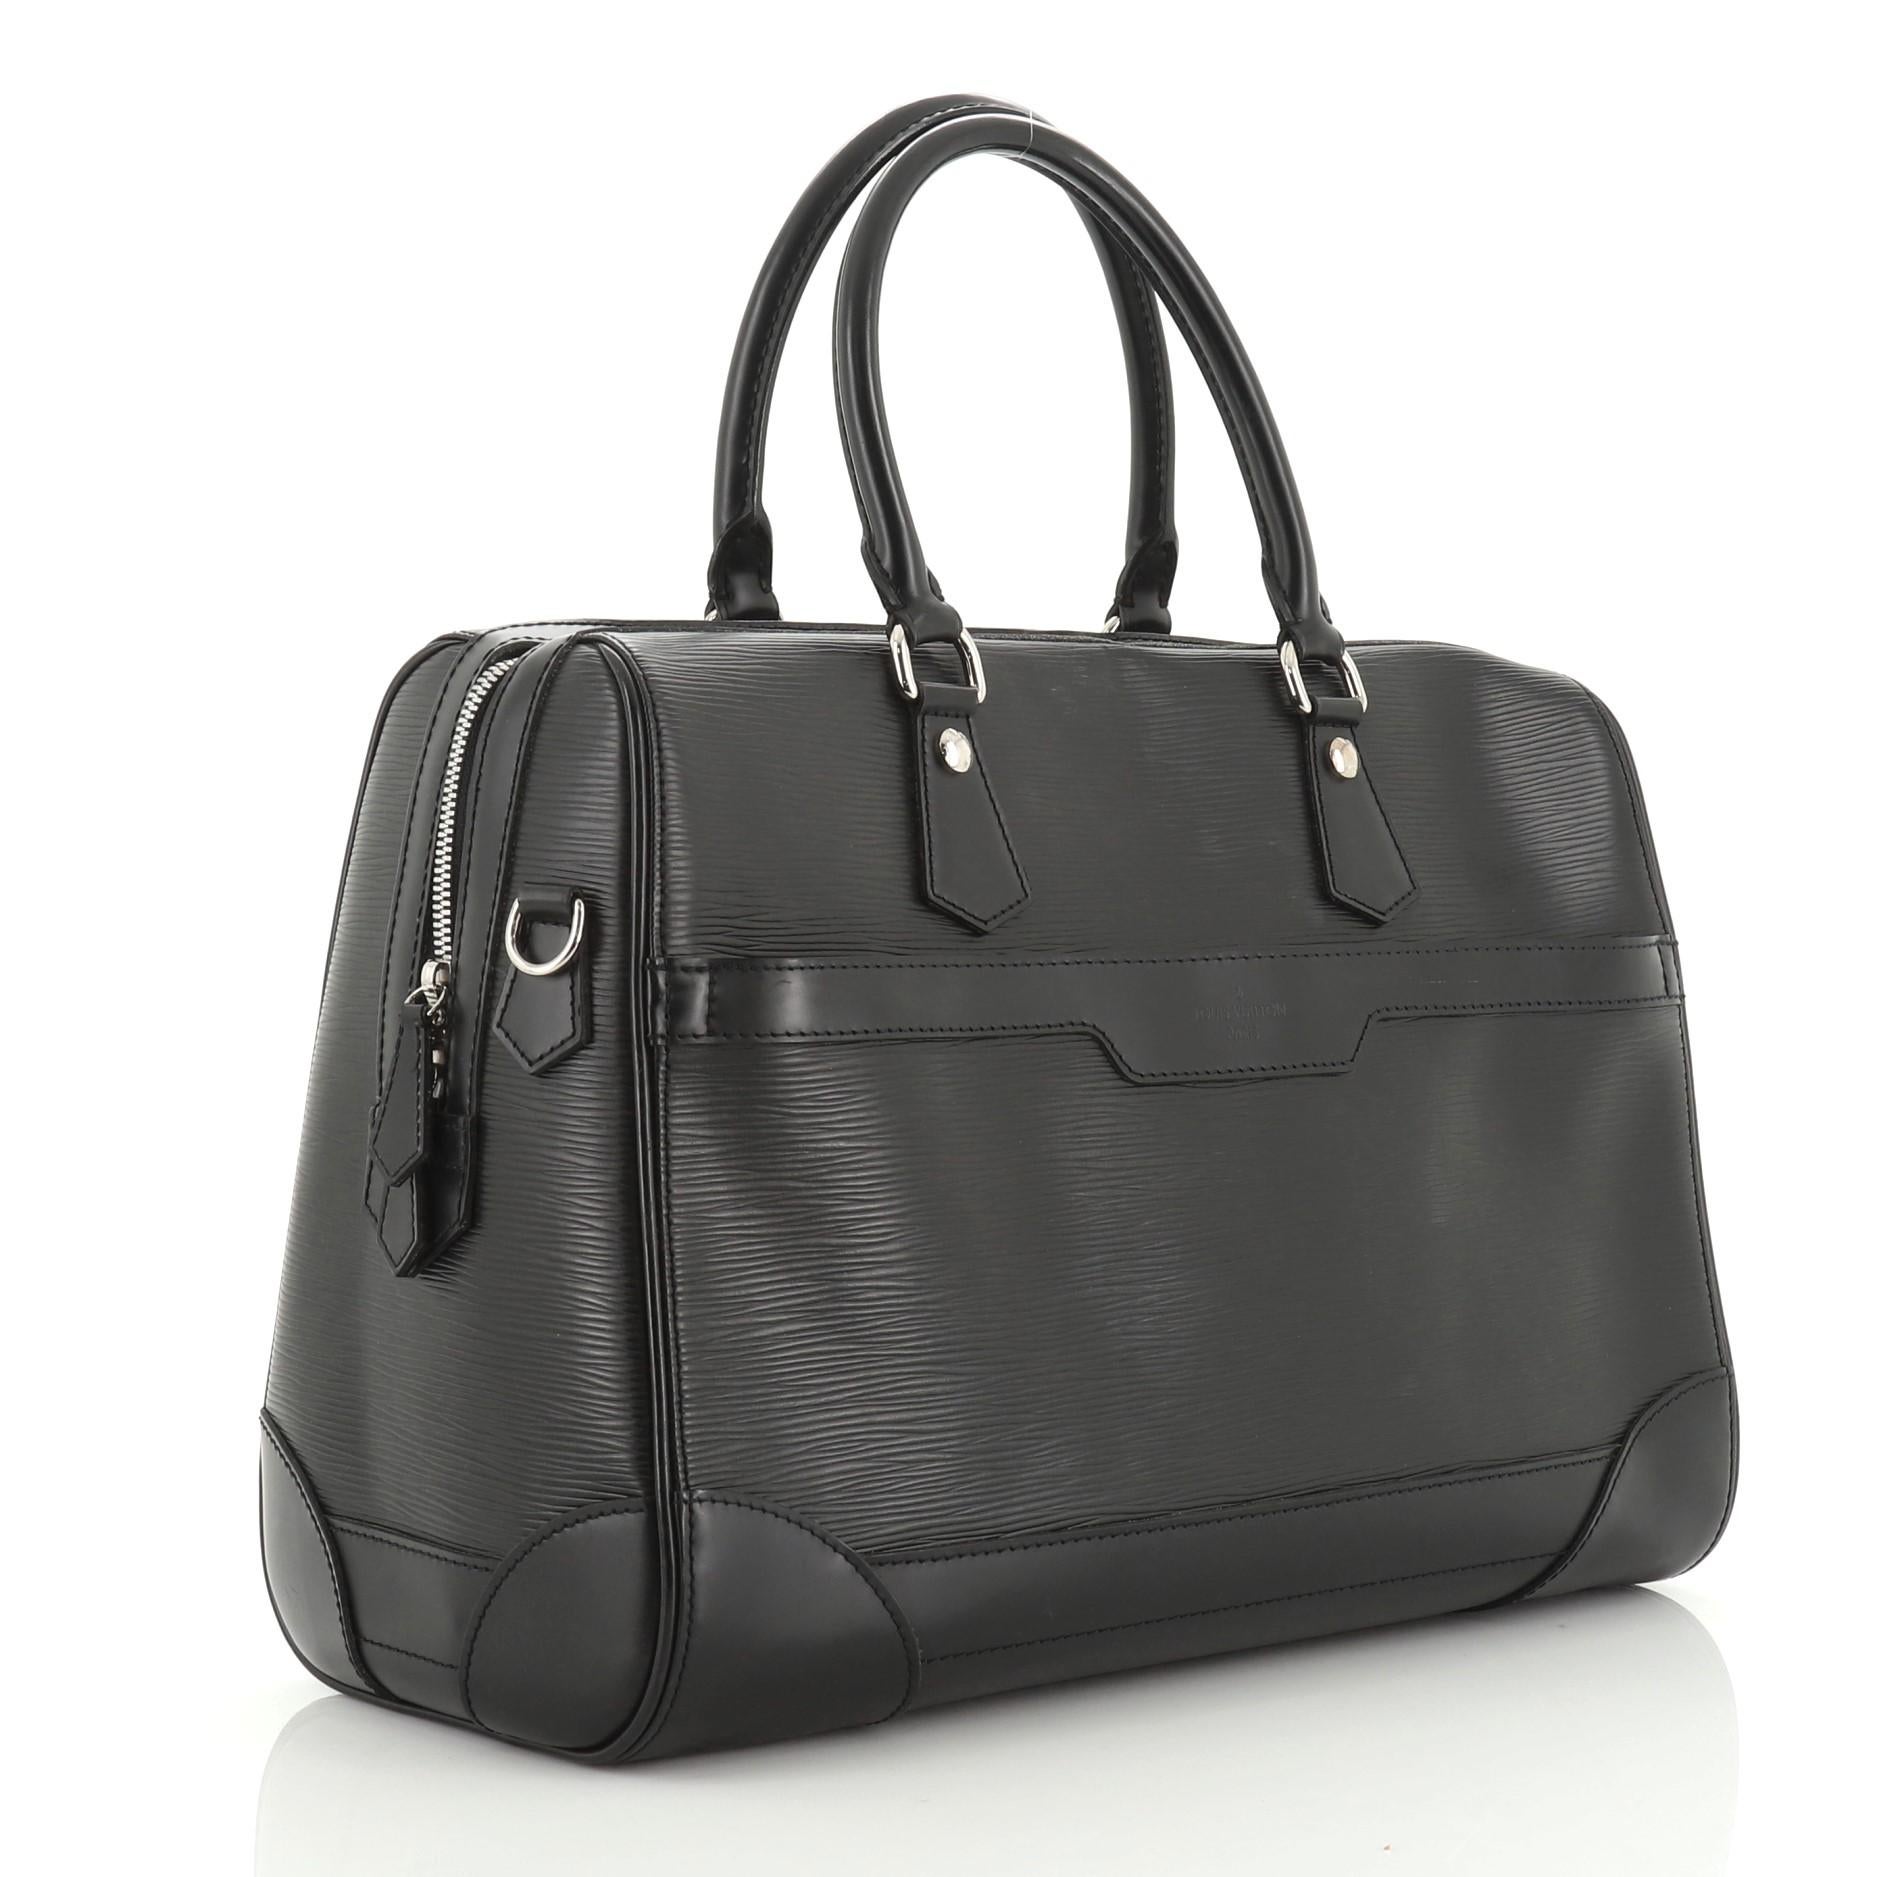 This Louis Vuitton Bourget Duffle Epi Leather 40, crafted in black epi leather, features dual rolled leather handles, smooth leather trim, front zip pocket and silver-tone hardware. Its zip closure opens to a black fabric interior with zip and slip